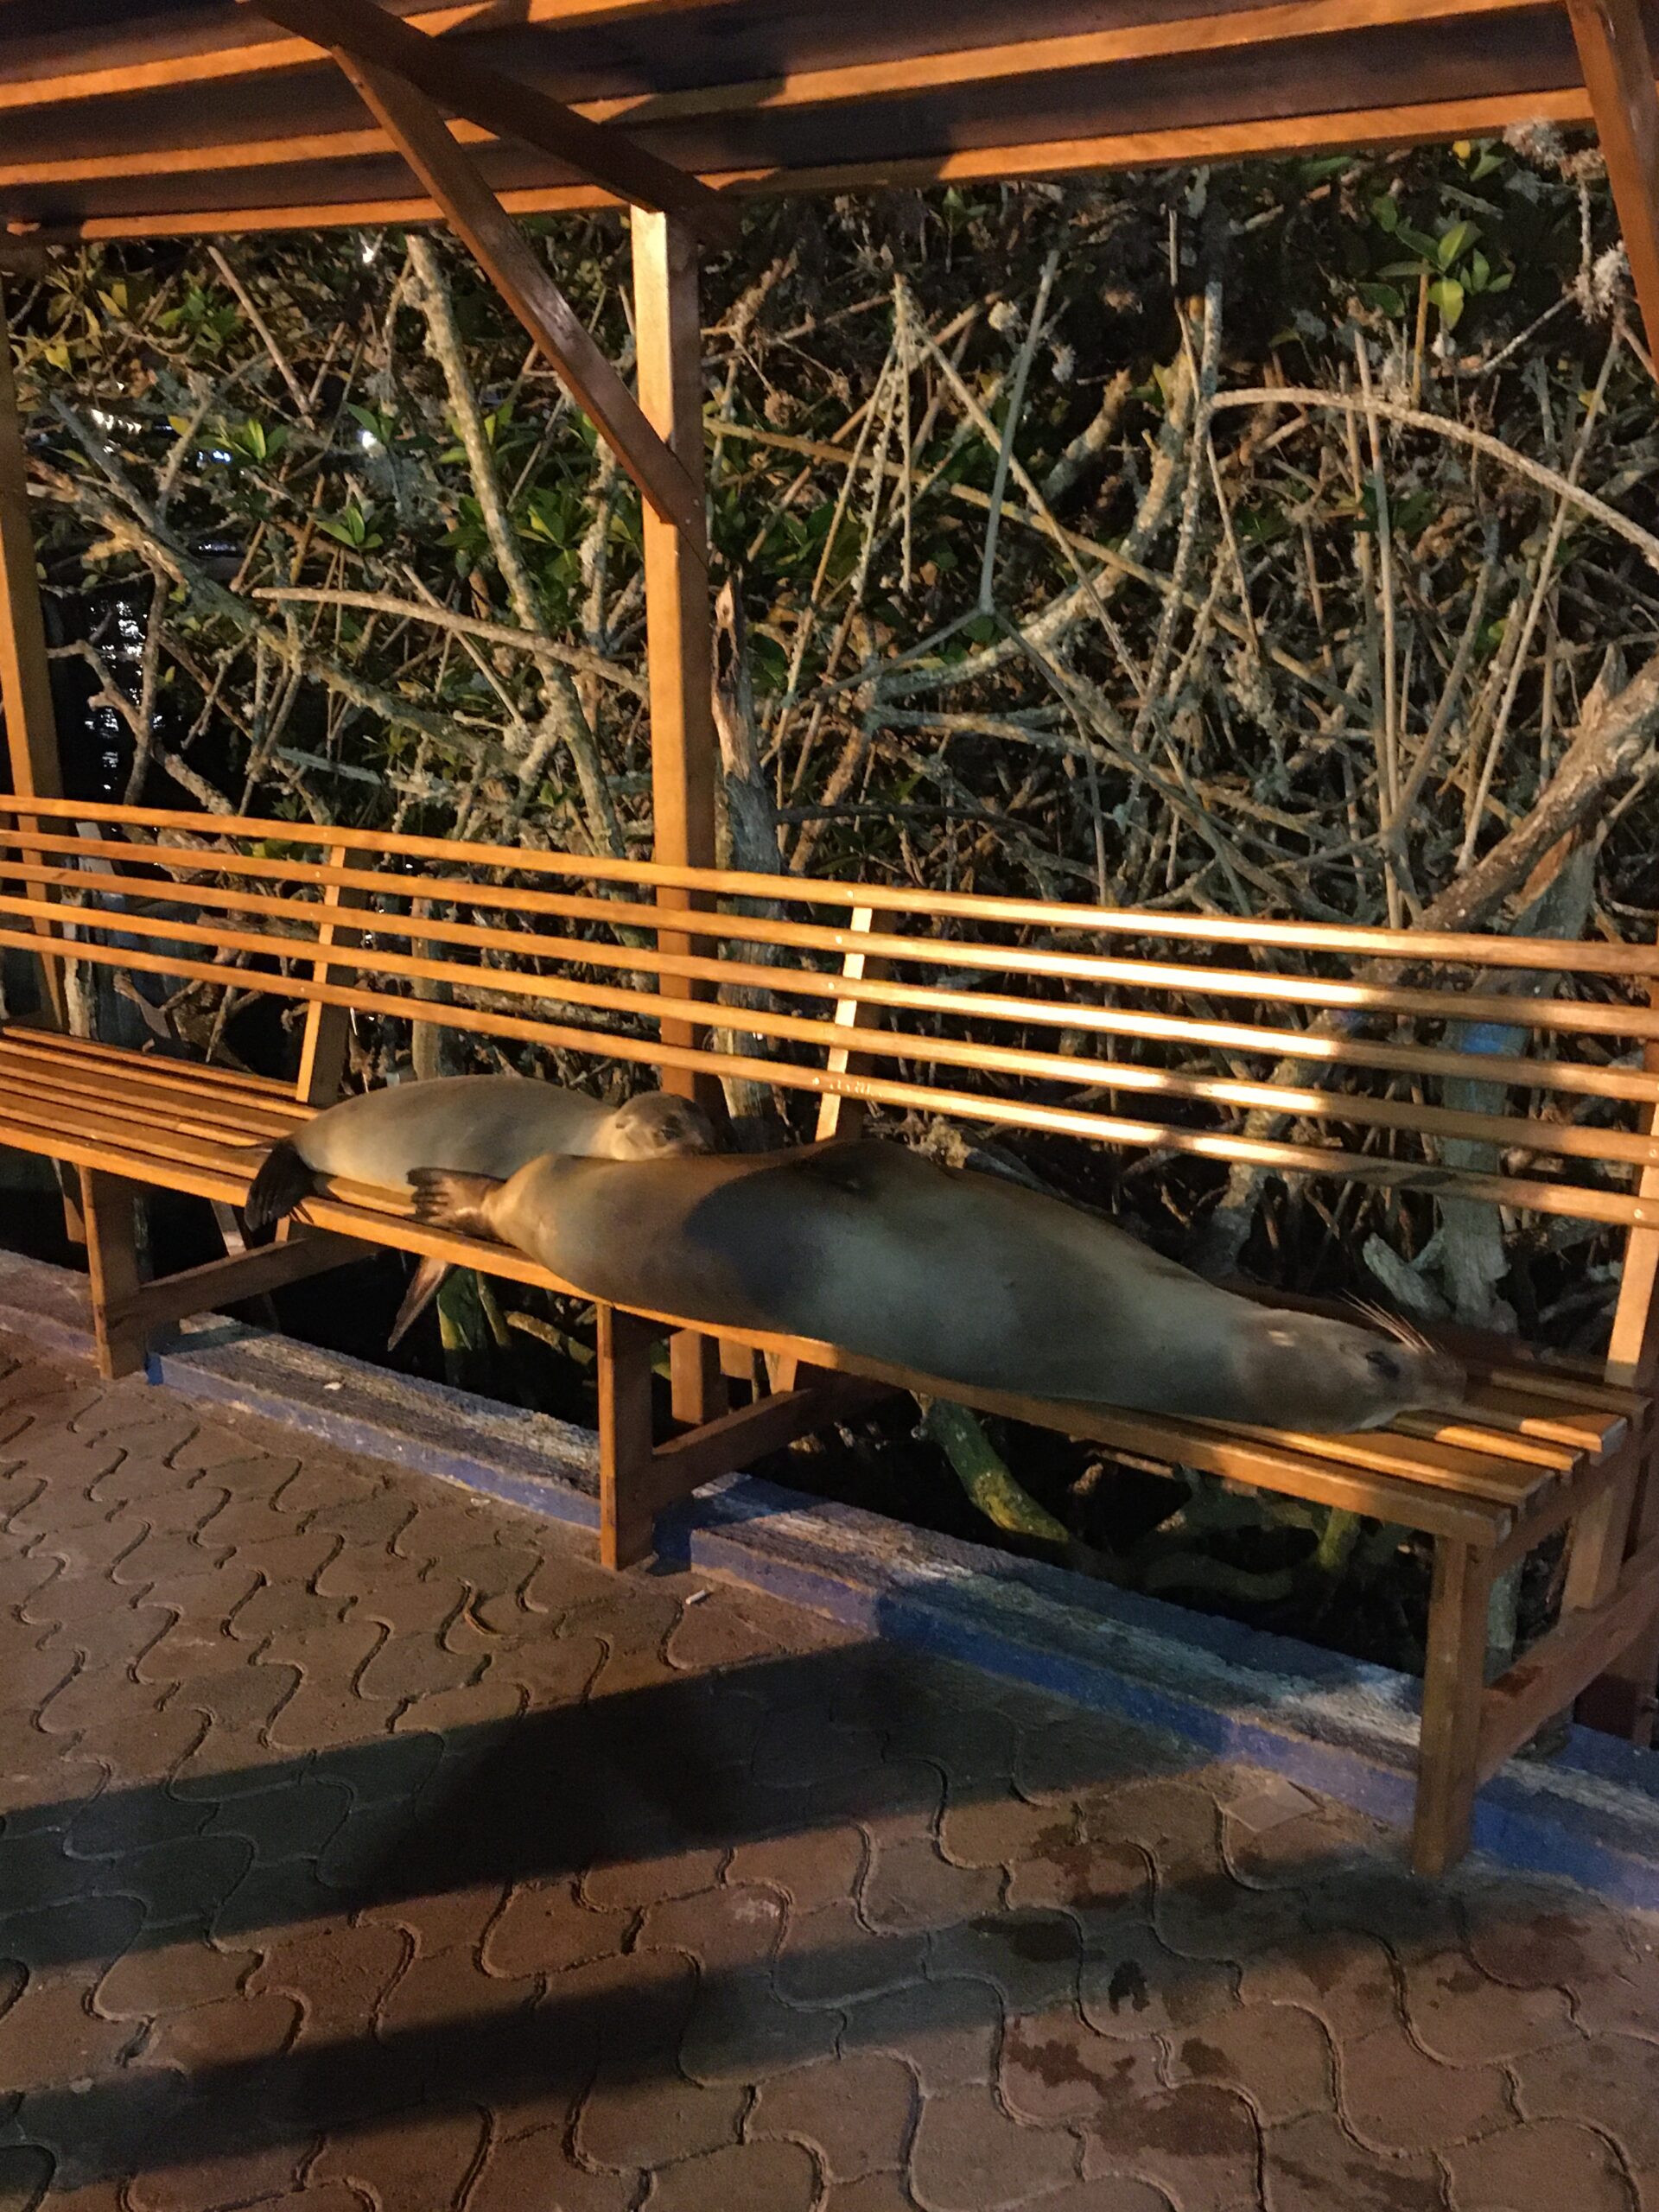 Pictured is a bench in Santa Cruz with two sea lions on the bench. It is a mama and her baby sleeping on the bench.